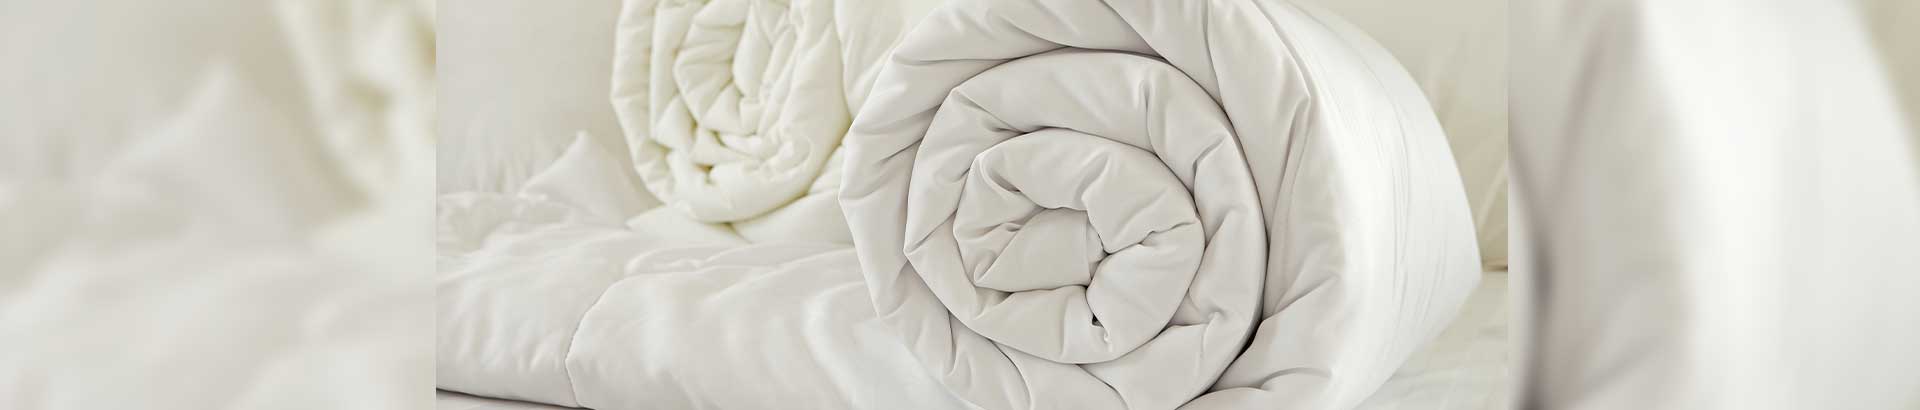 Silk duvets vs a synthetic duvet to show the natural properties on THREE duvets